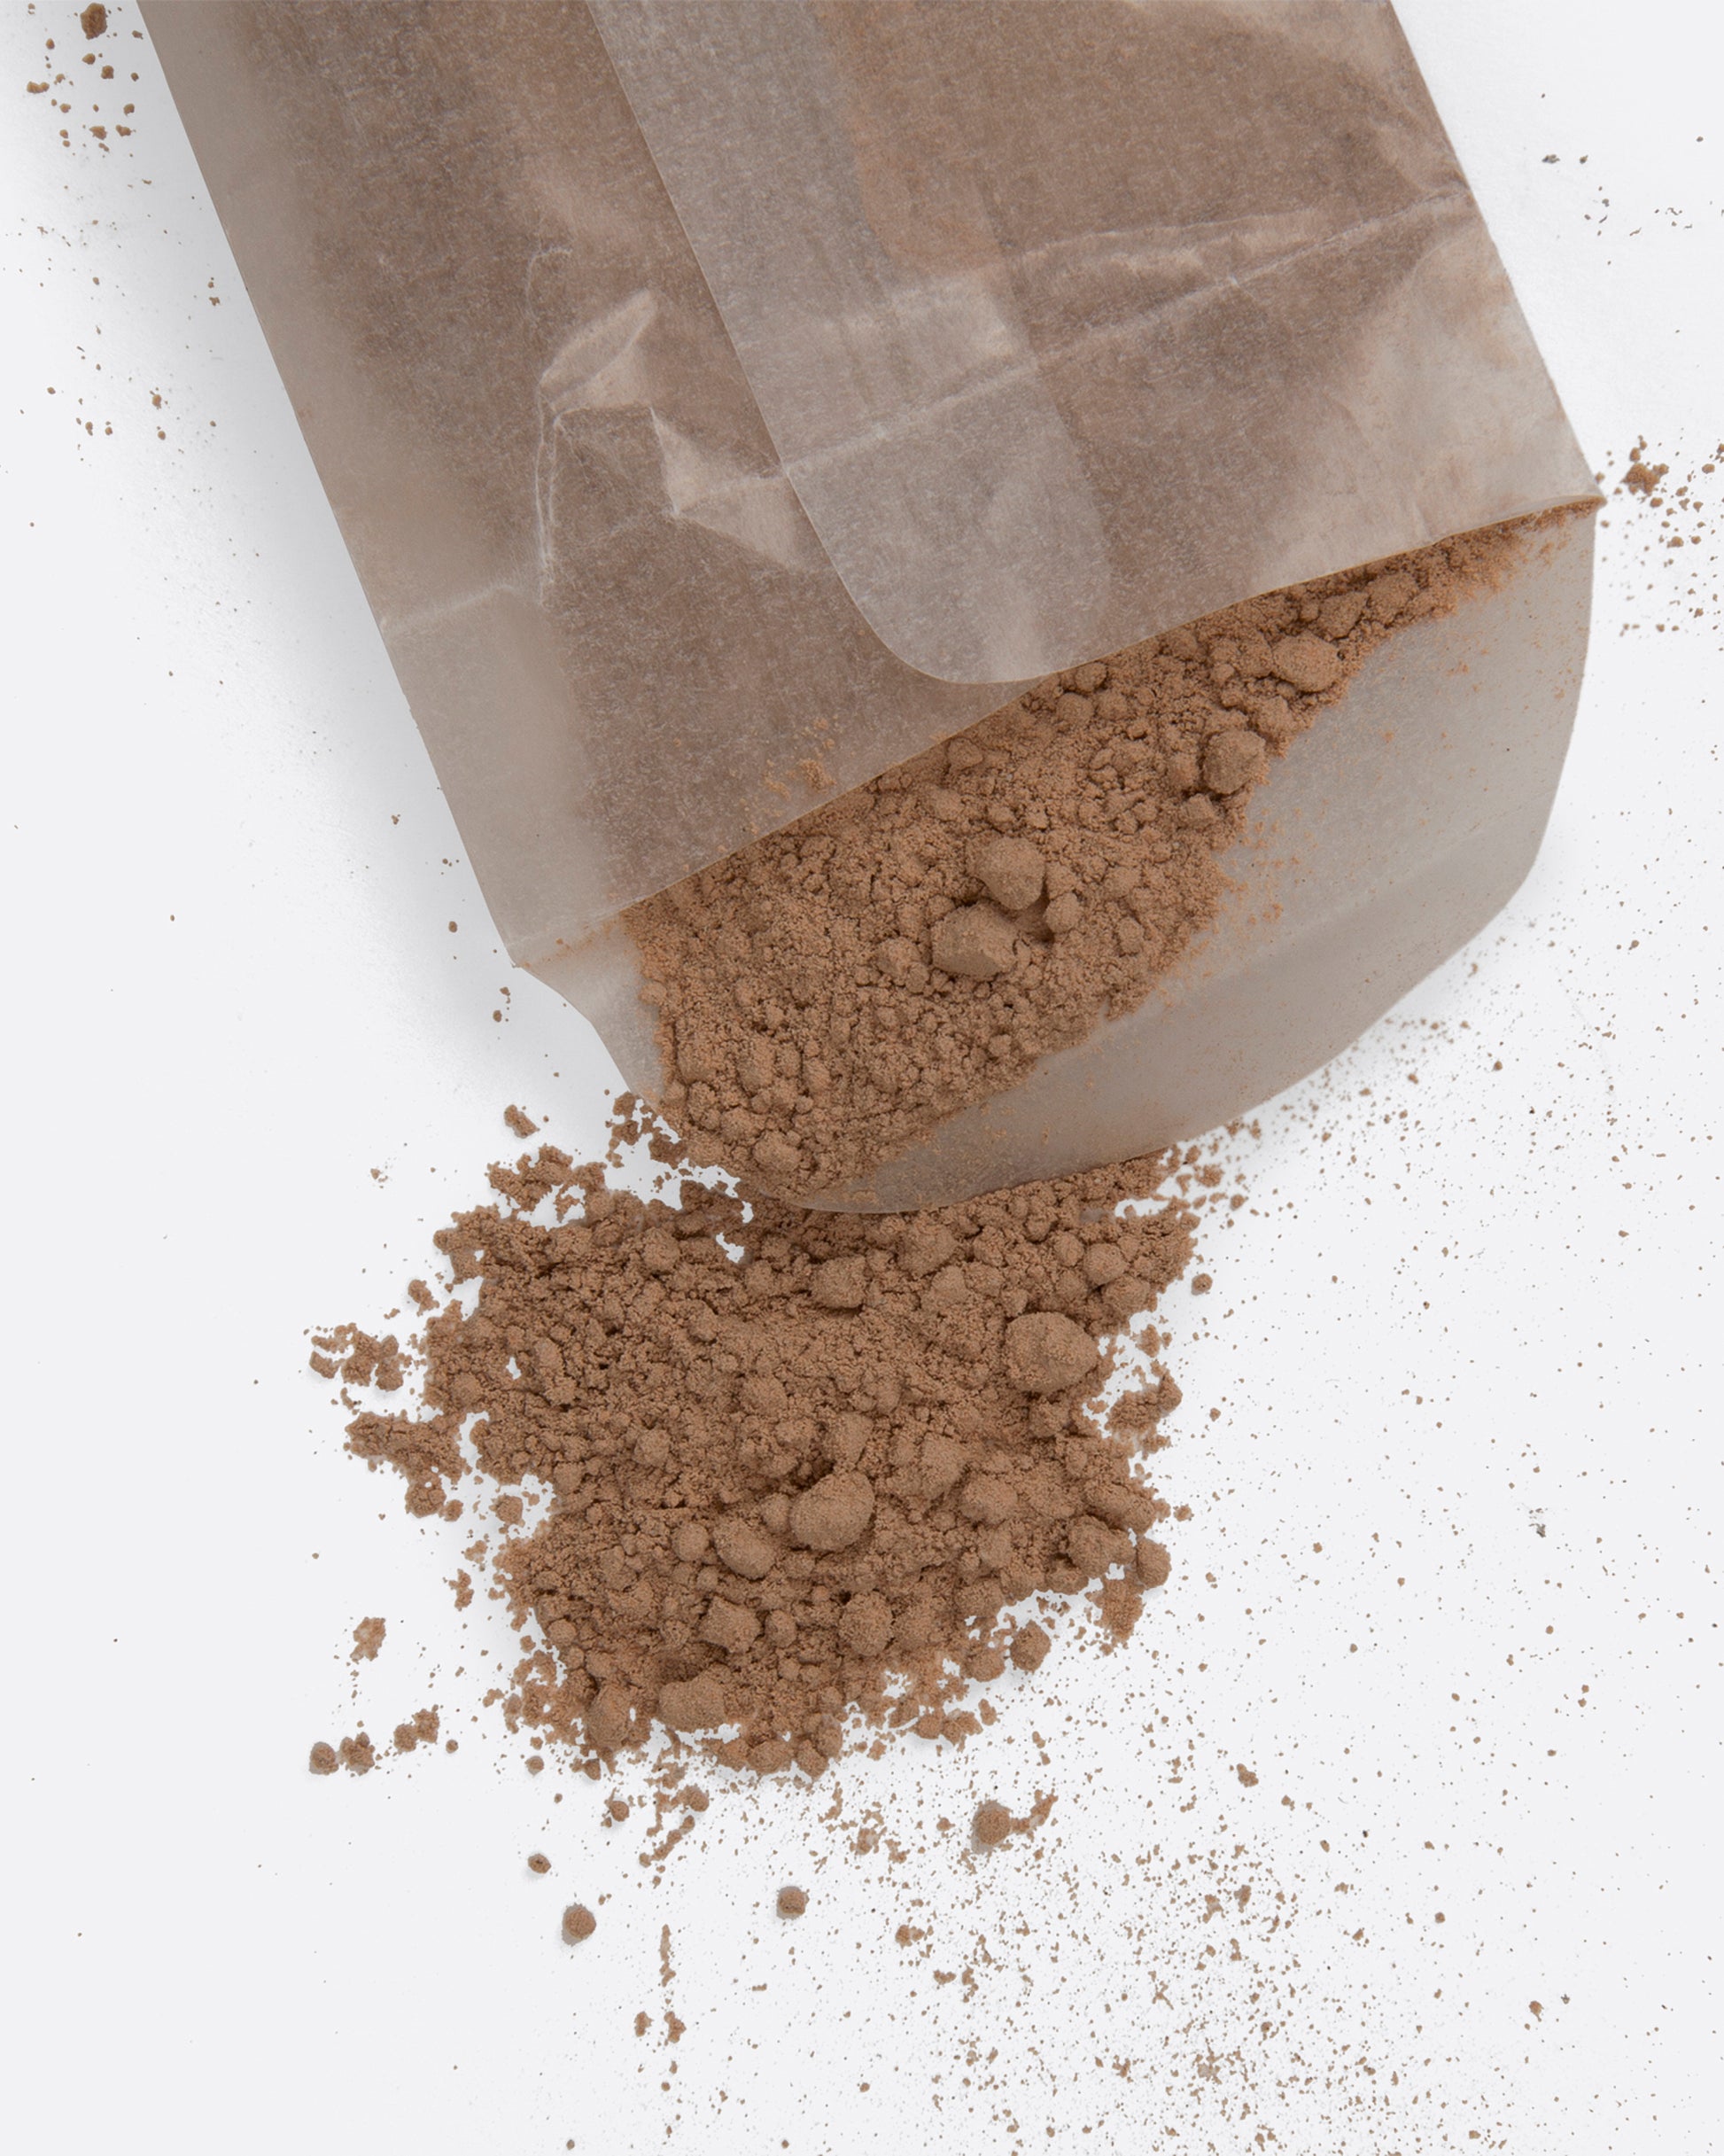 The dry powder form of the Deep Pore Cleaning Face Mask.